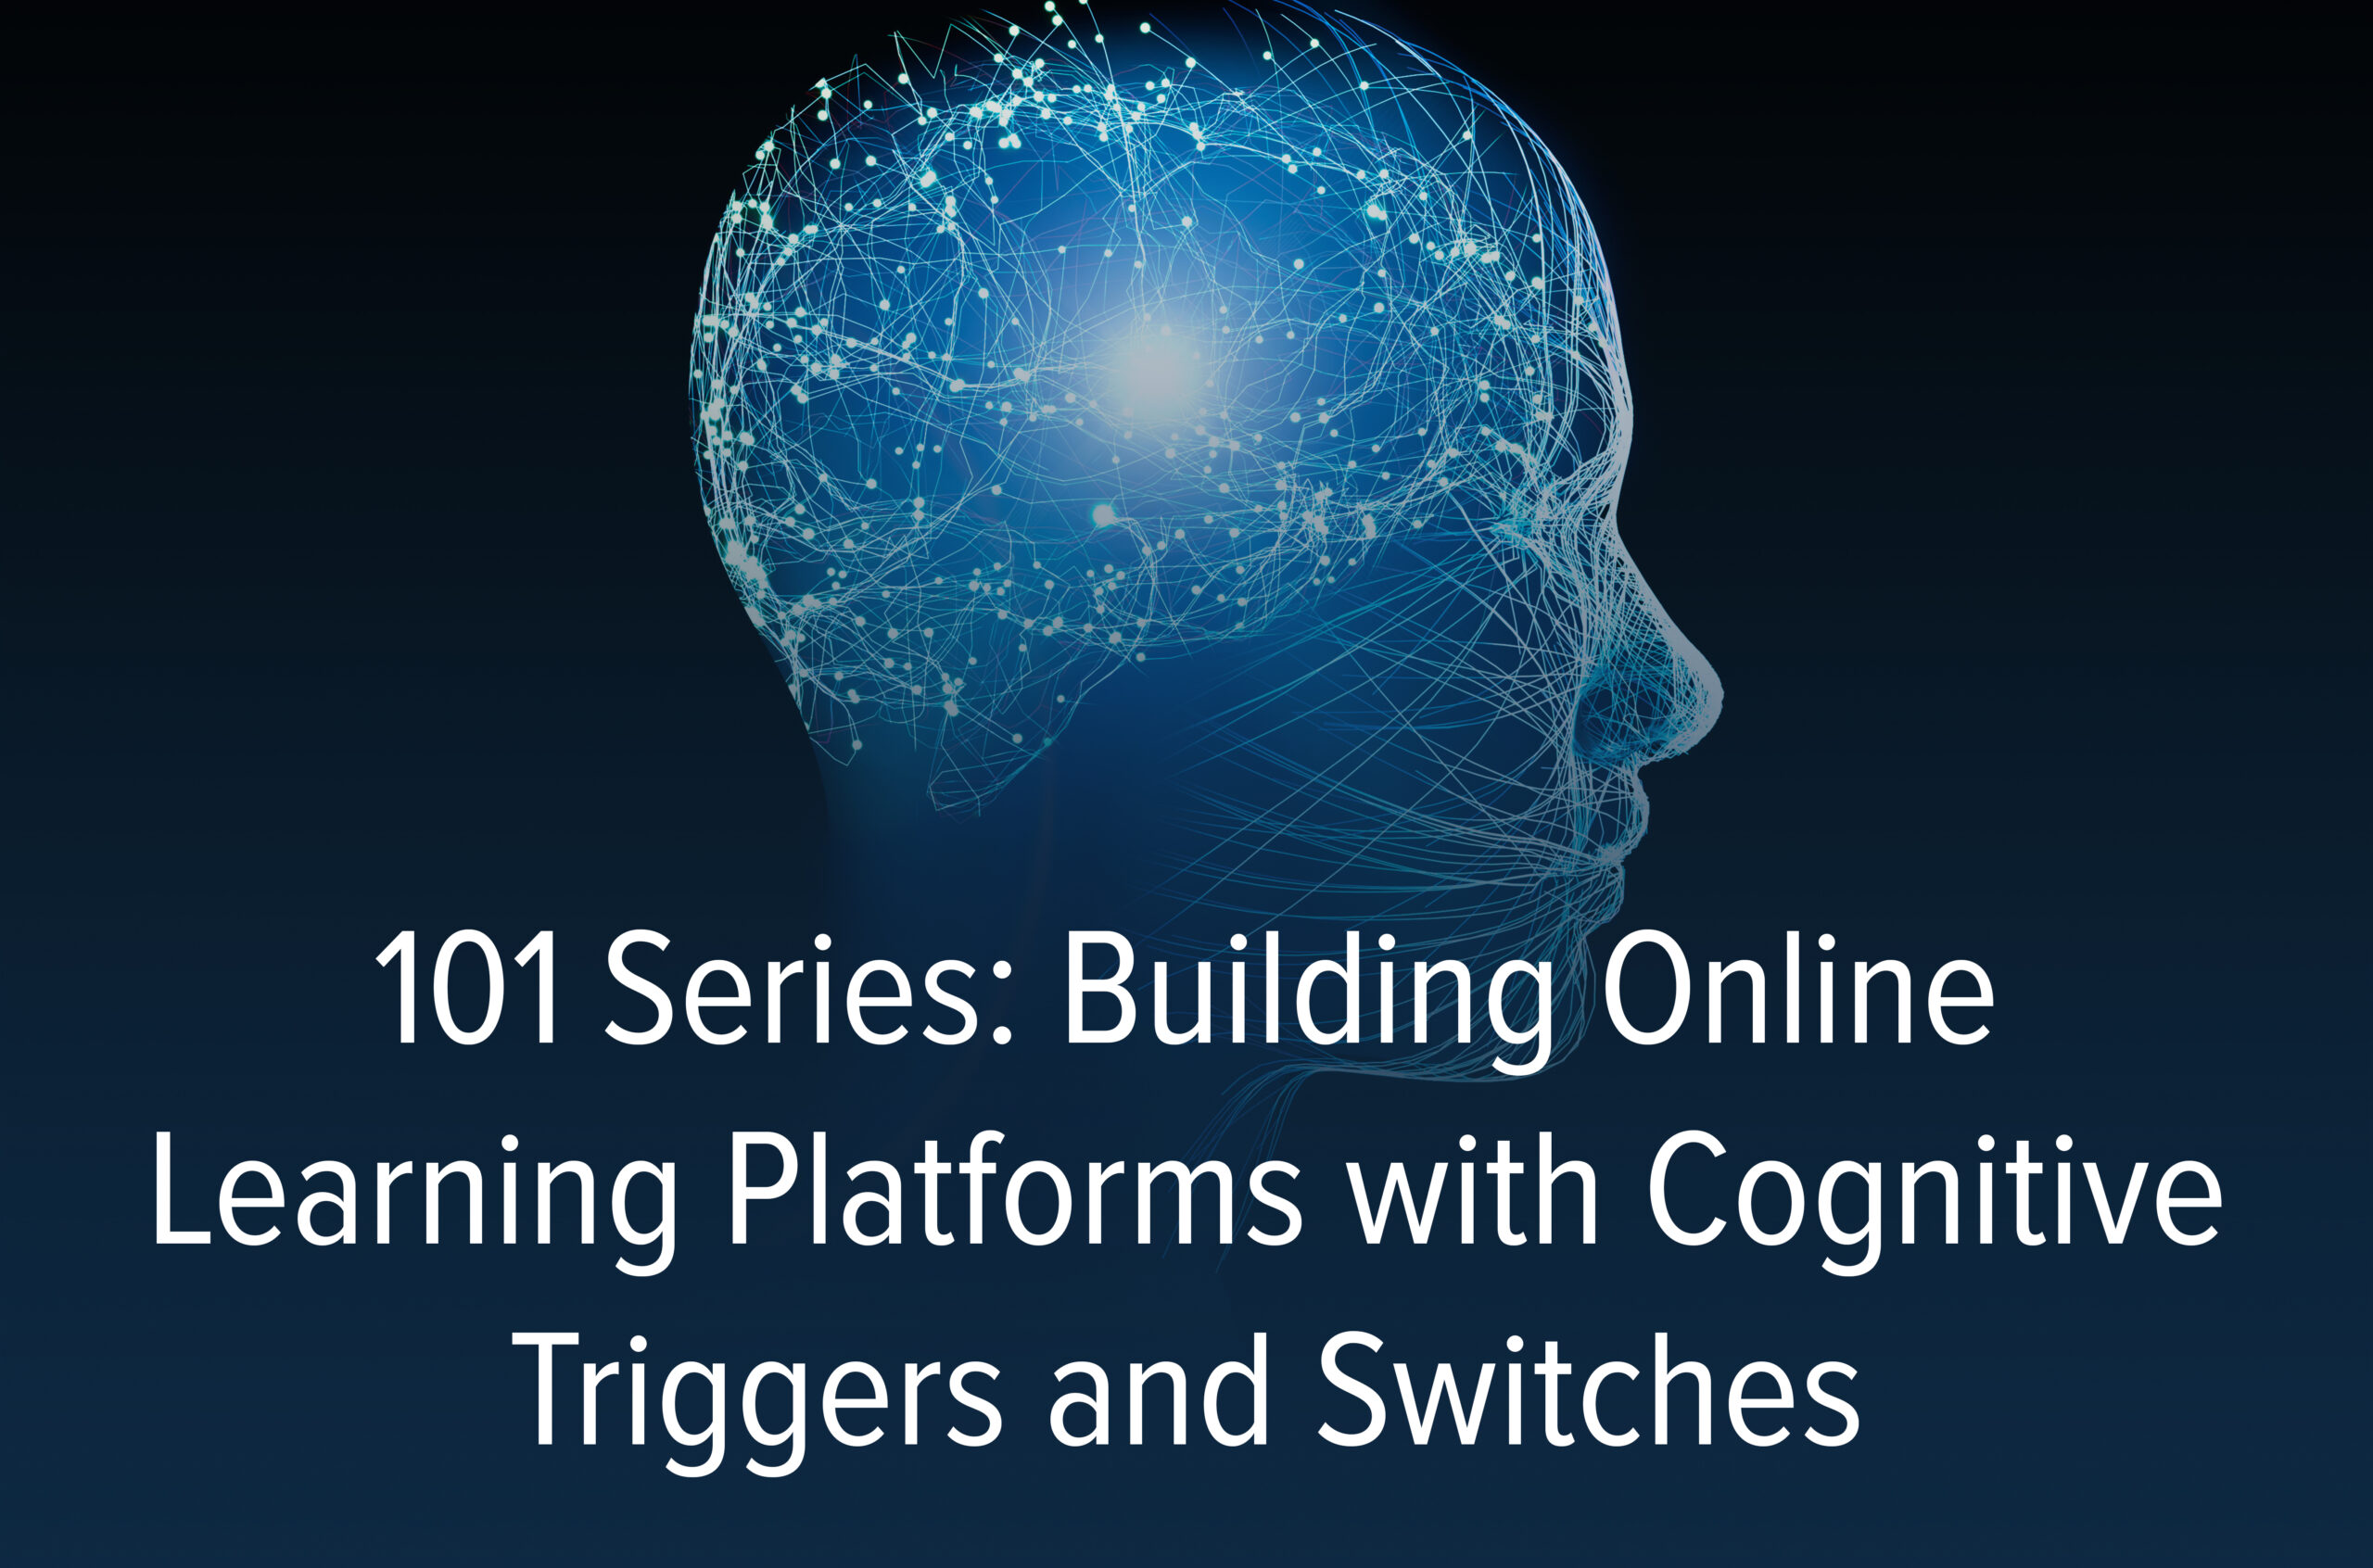 Building Online Learning Platforms with Cognitive Triggers and Switches